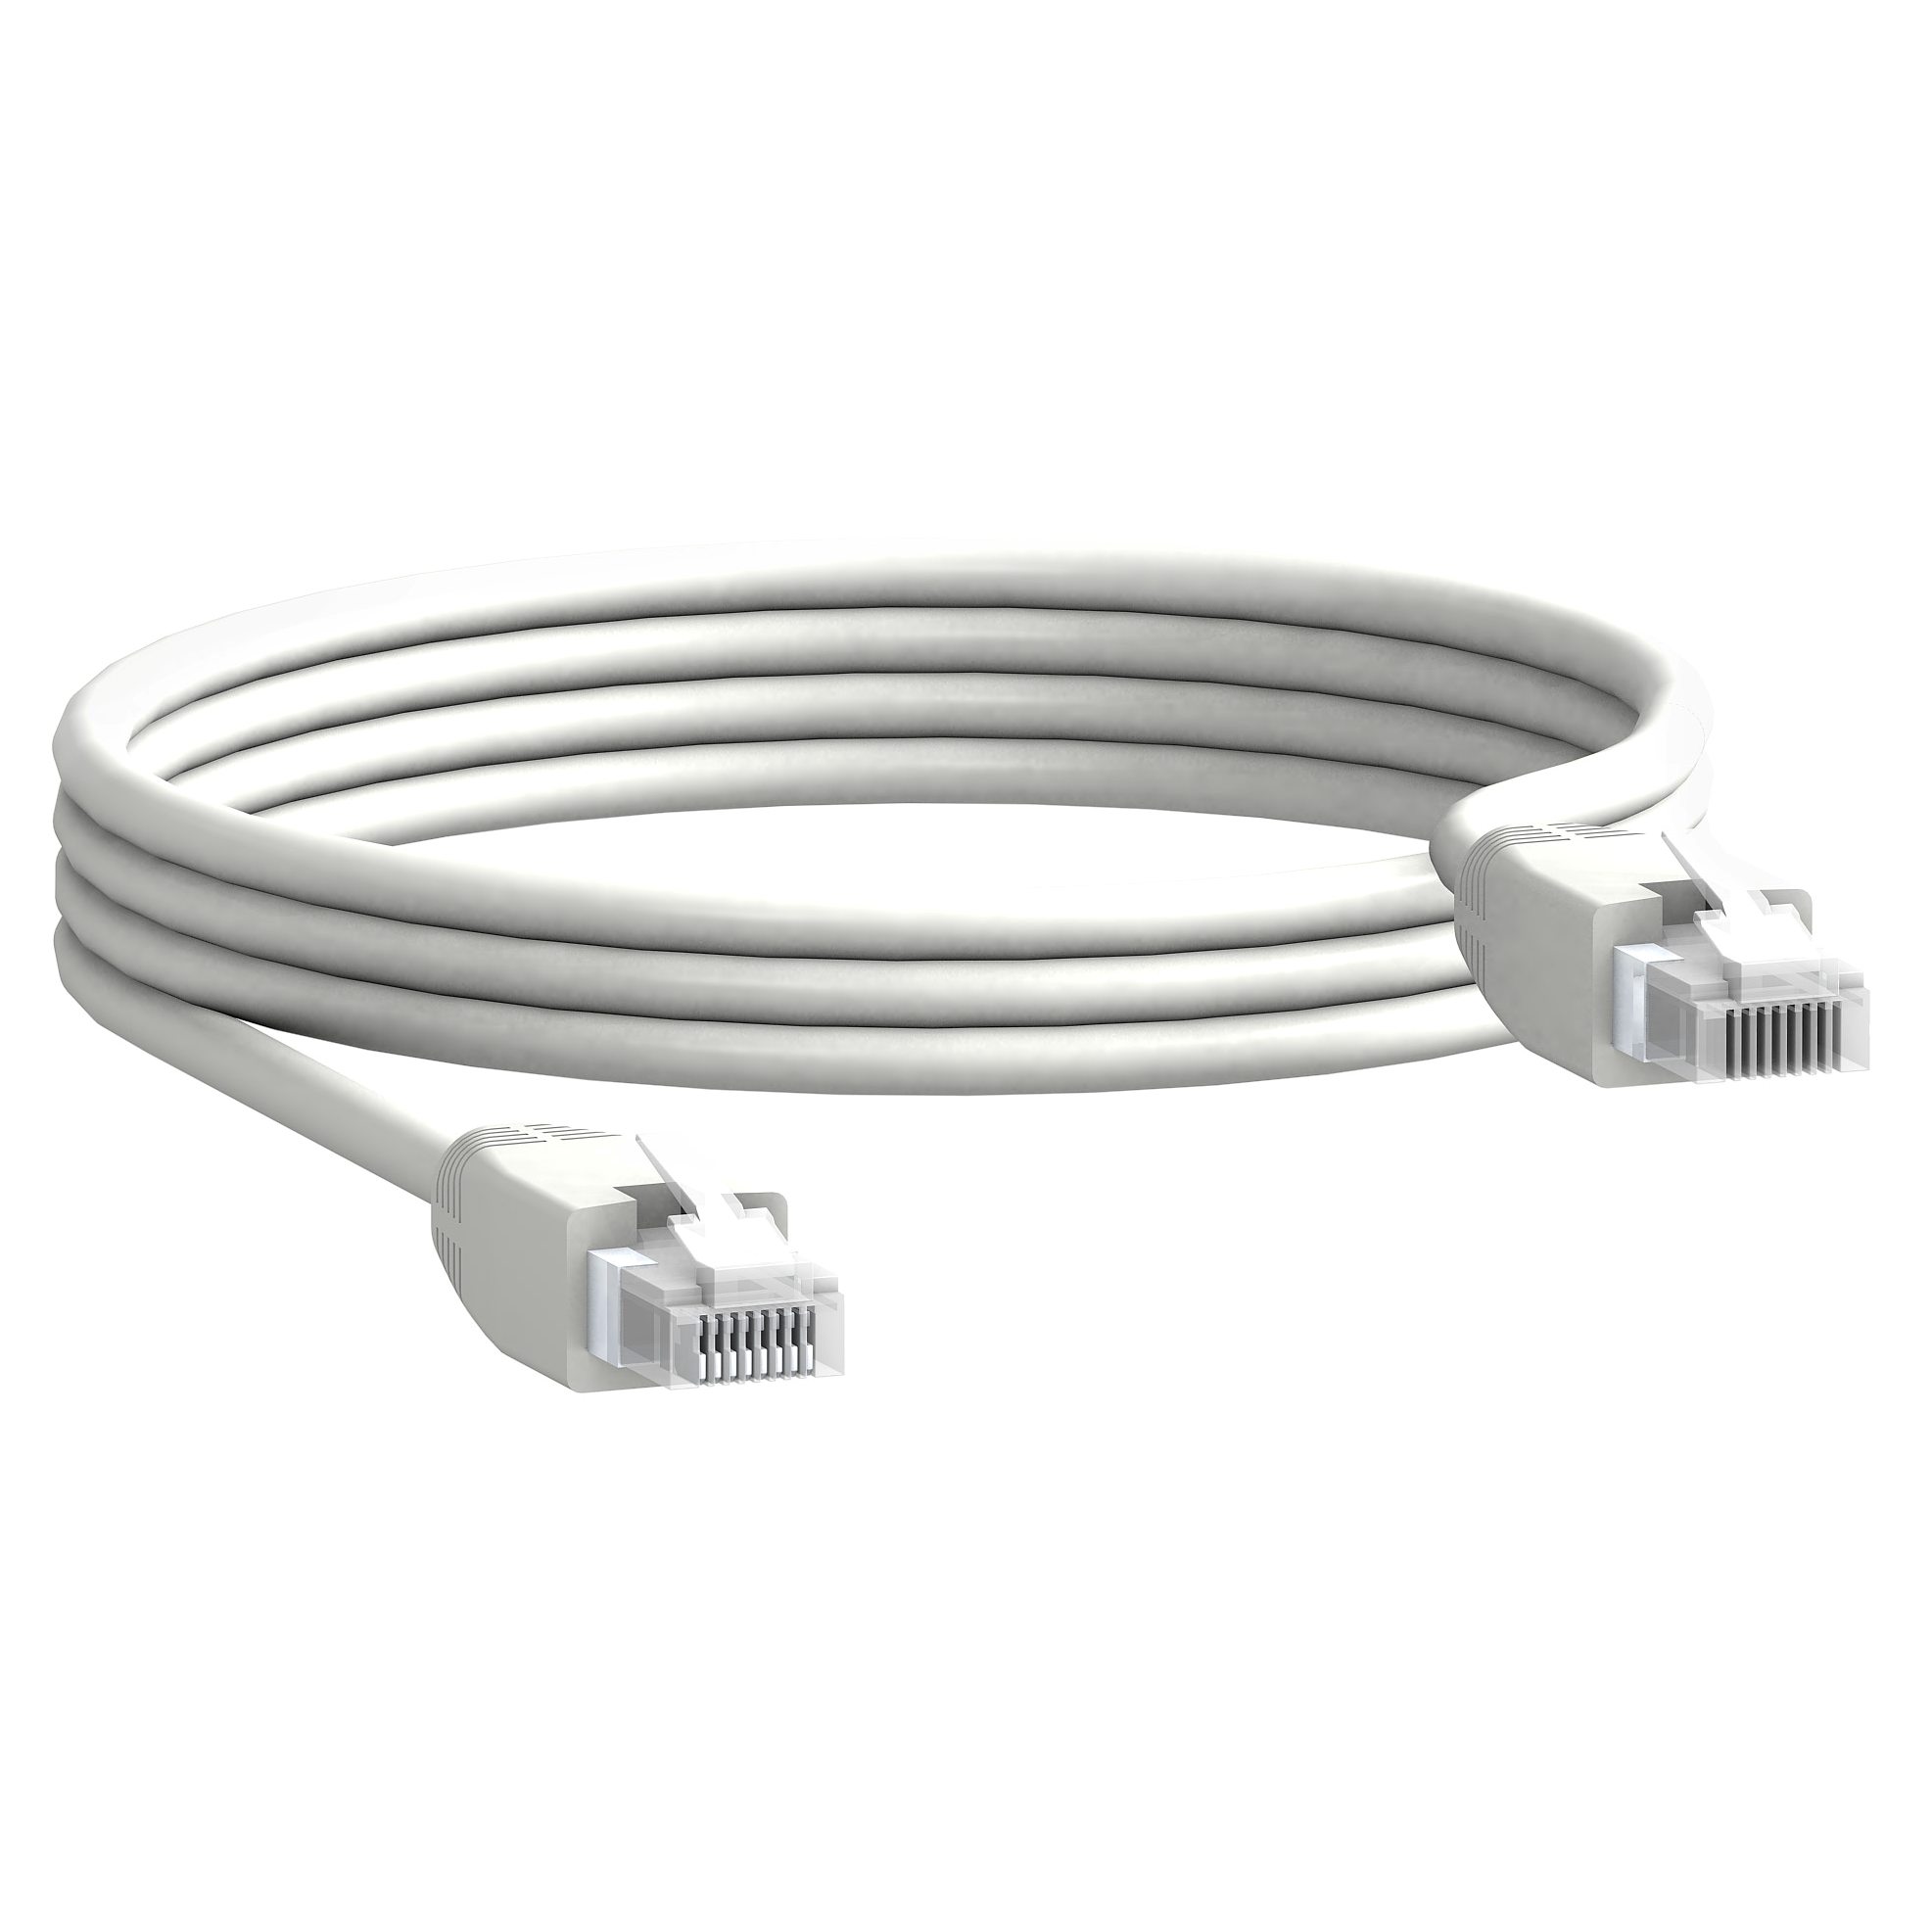 Schneider Electric Ethernet Cable, RJ45 to RJ45, 2m